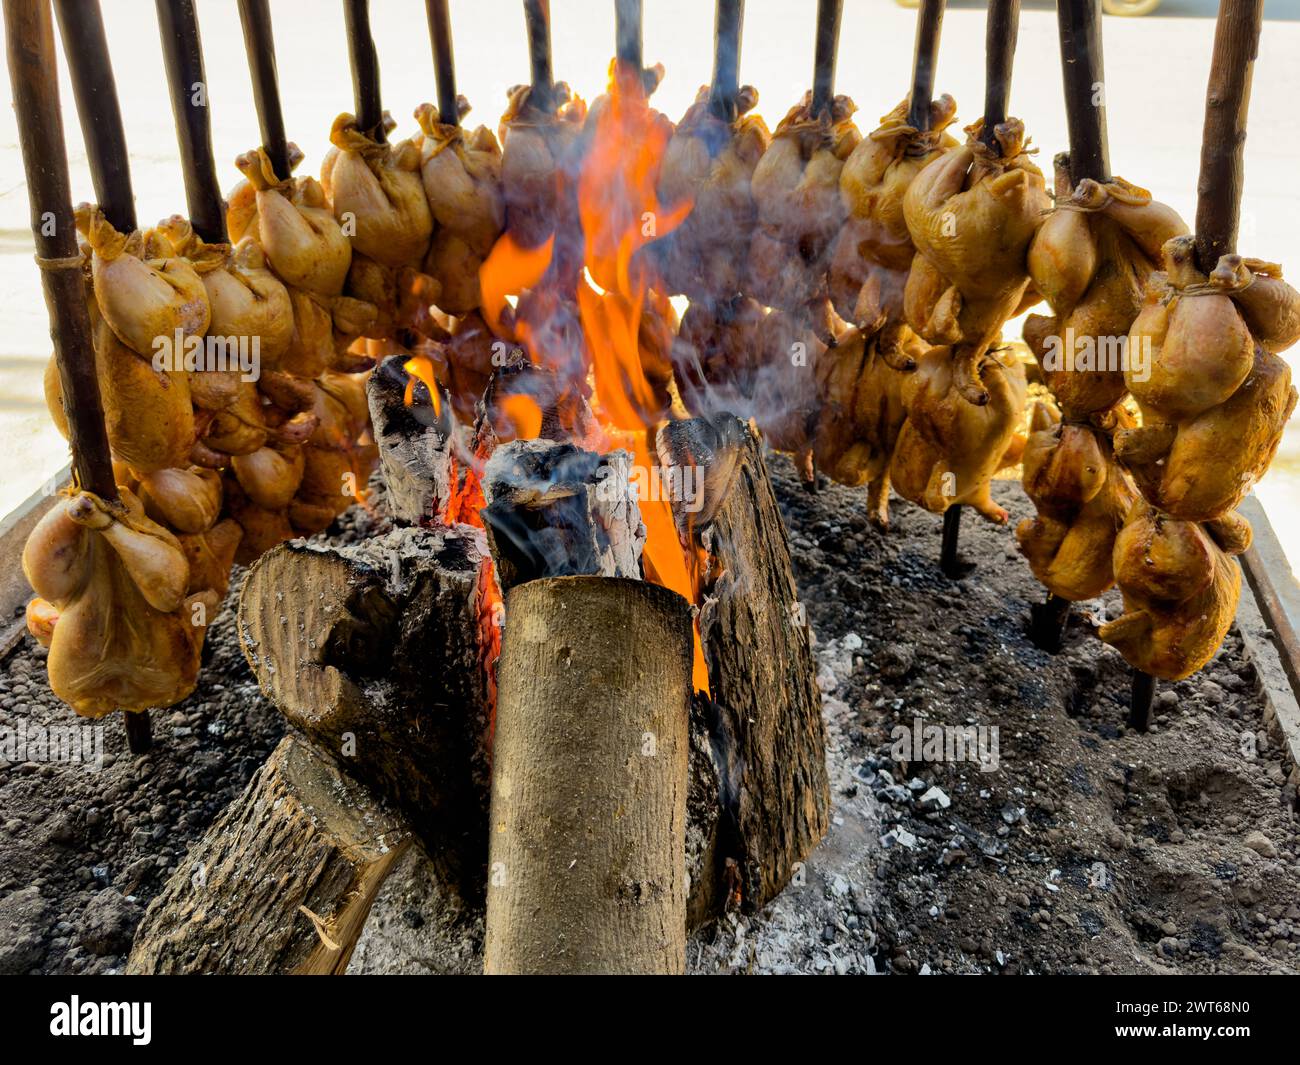 Balochi Chicken Sajji is a traditional dish of slow roasted over open fire Stock Photo